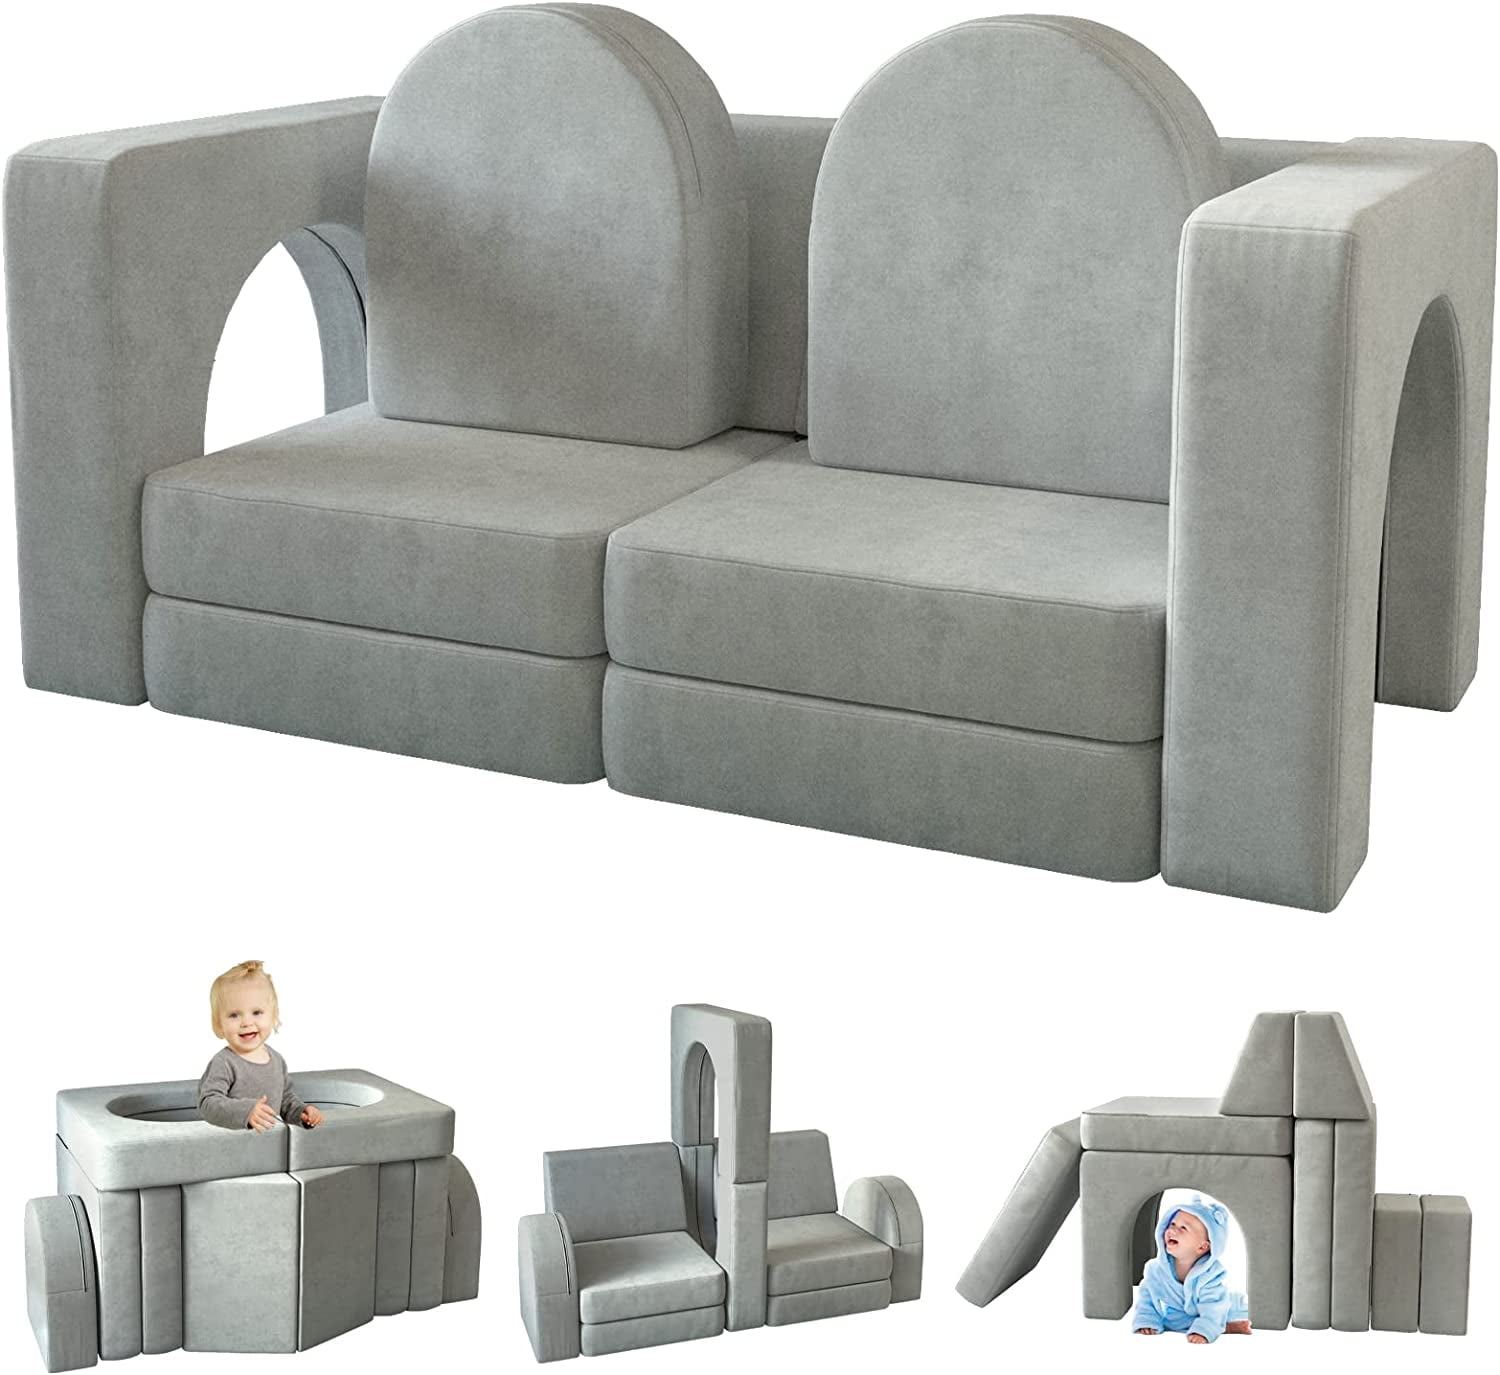 Kids Couch 12PCS, Linor Modular Toddler Couch for Playroom, Dutch Velvet  Multifunctional Kid Couch, Grey